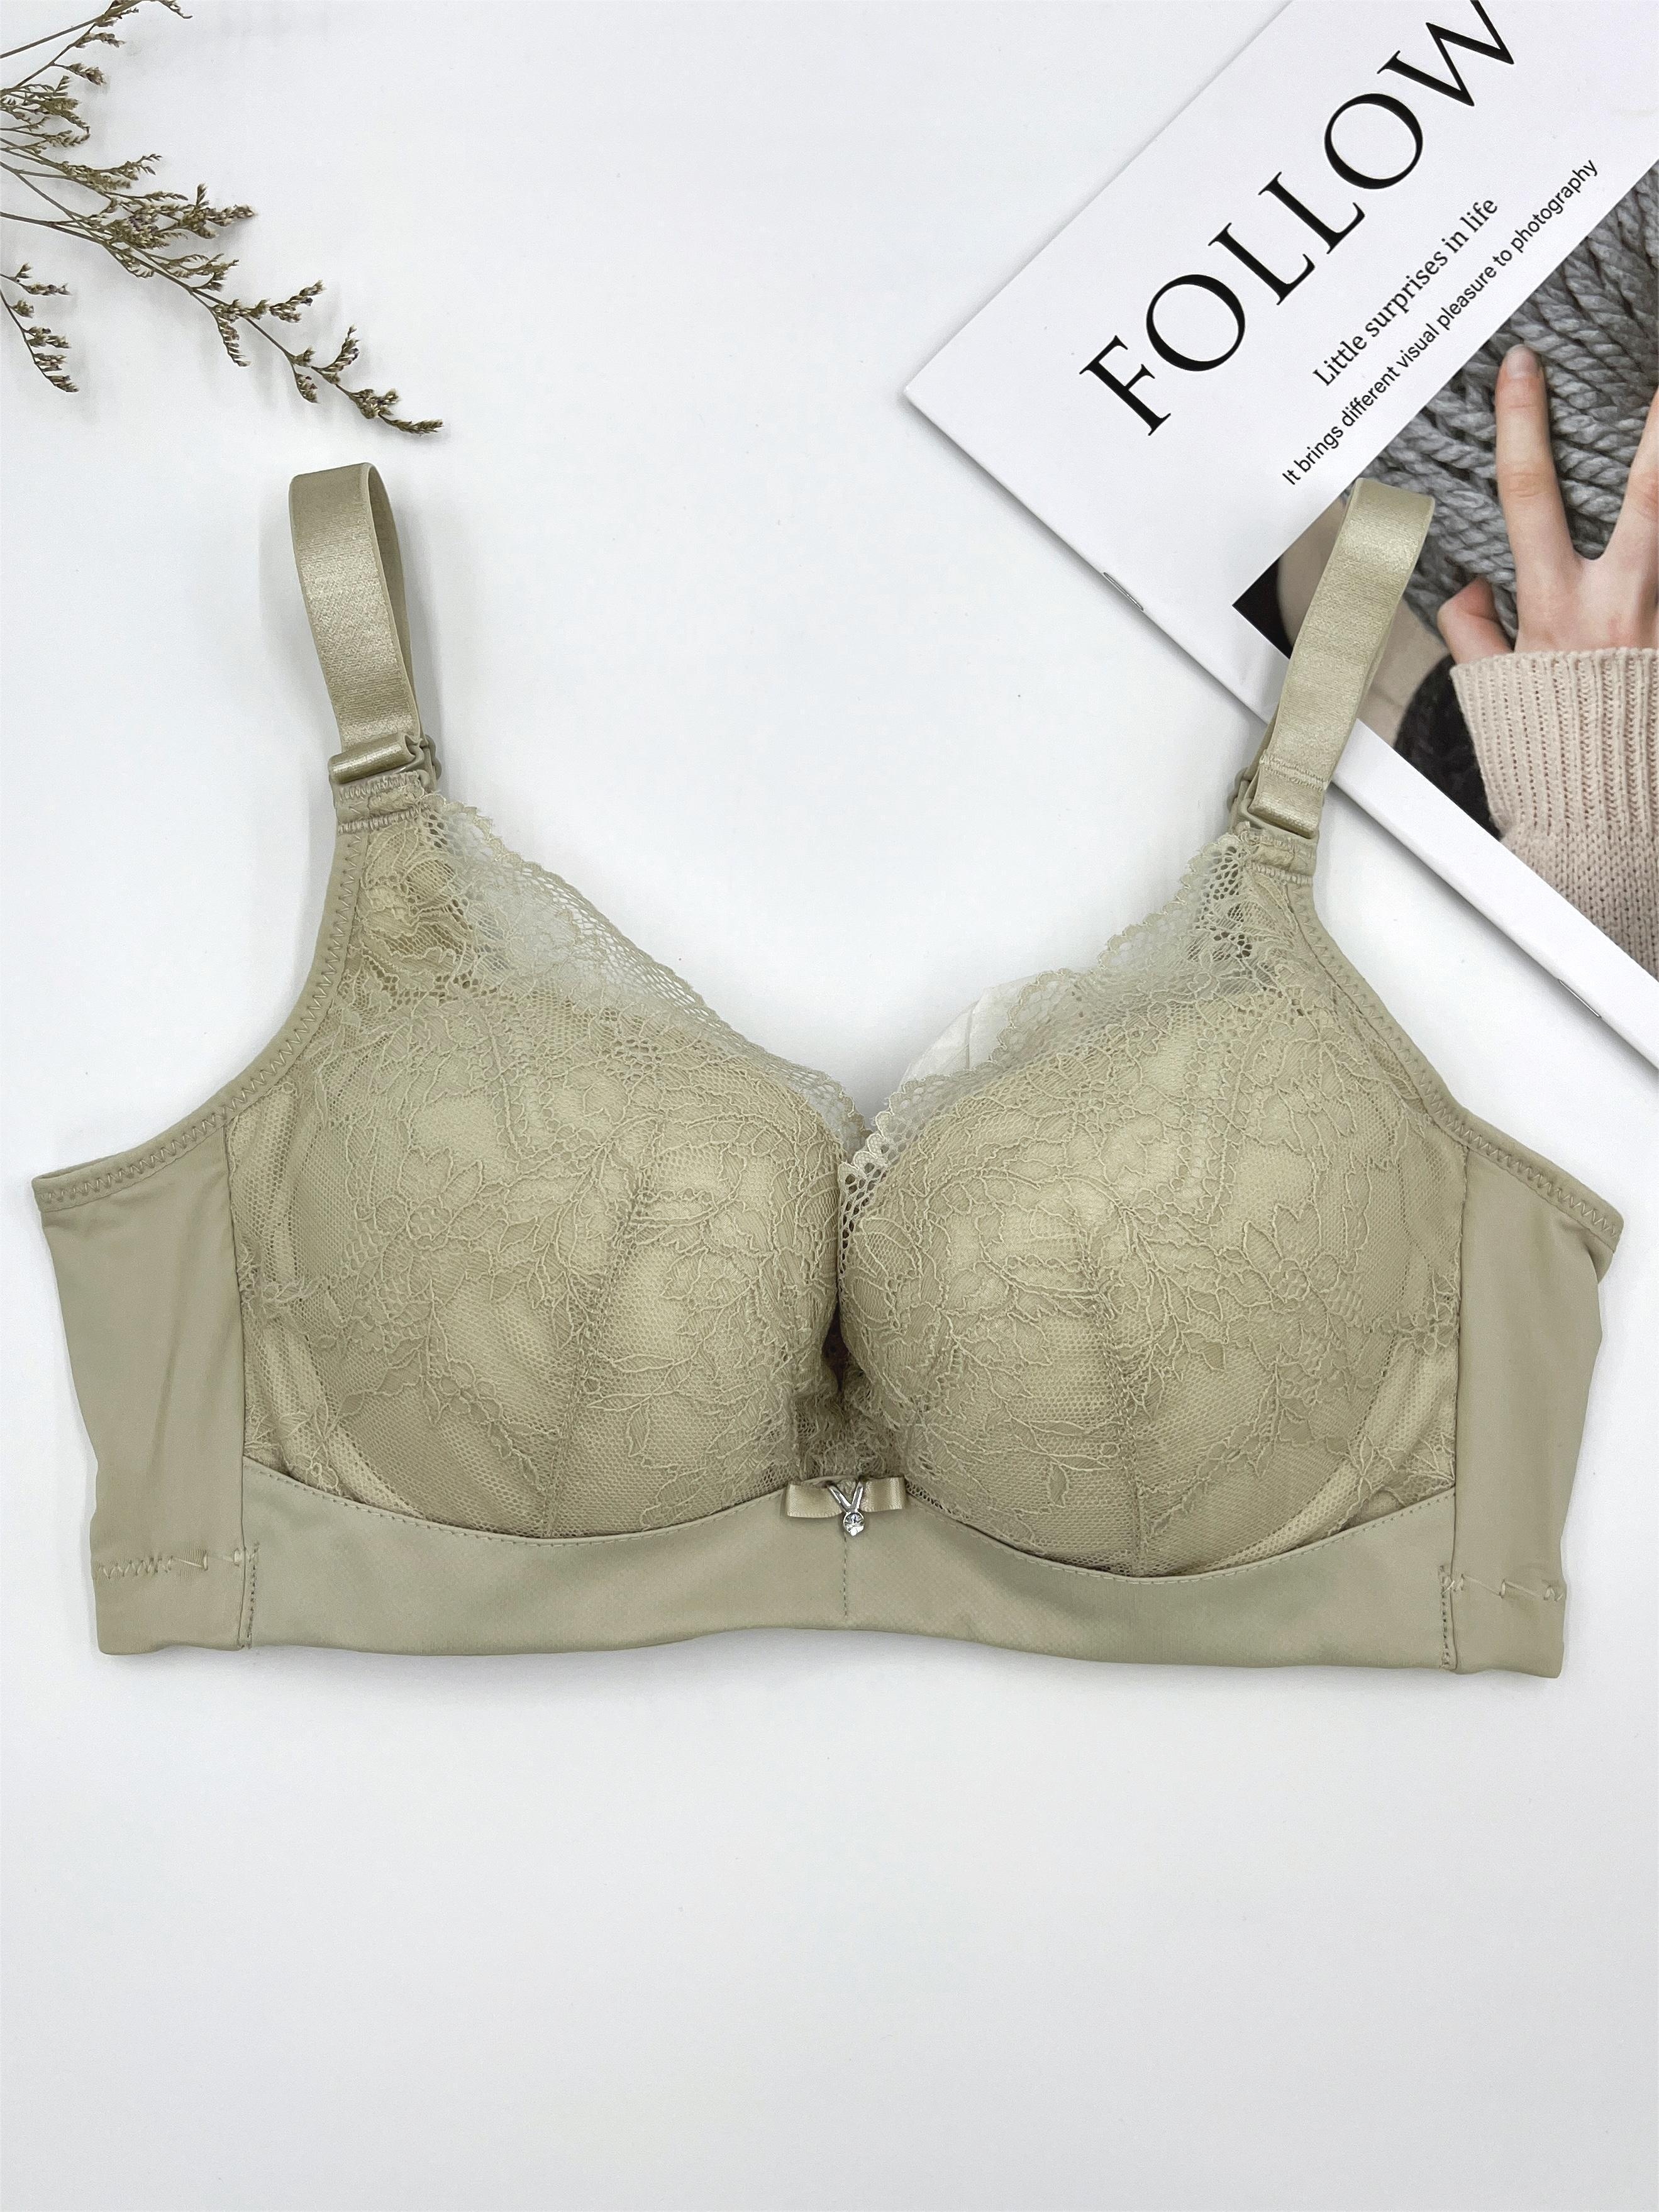 Bras For Women New Water Soluble Lace Contrasting Colors Bras